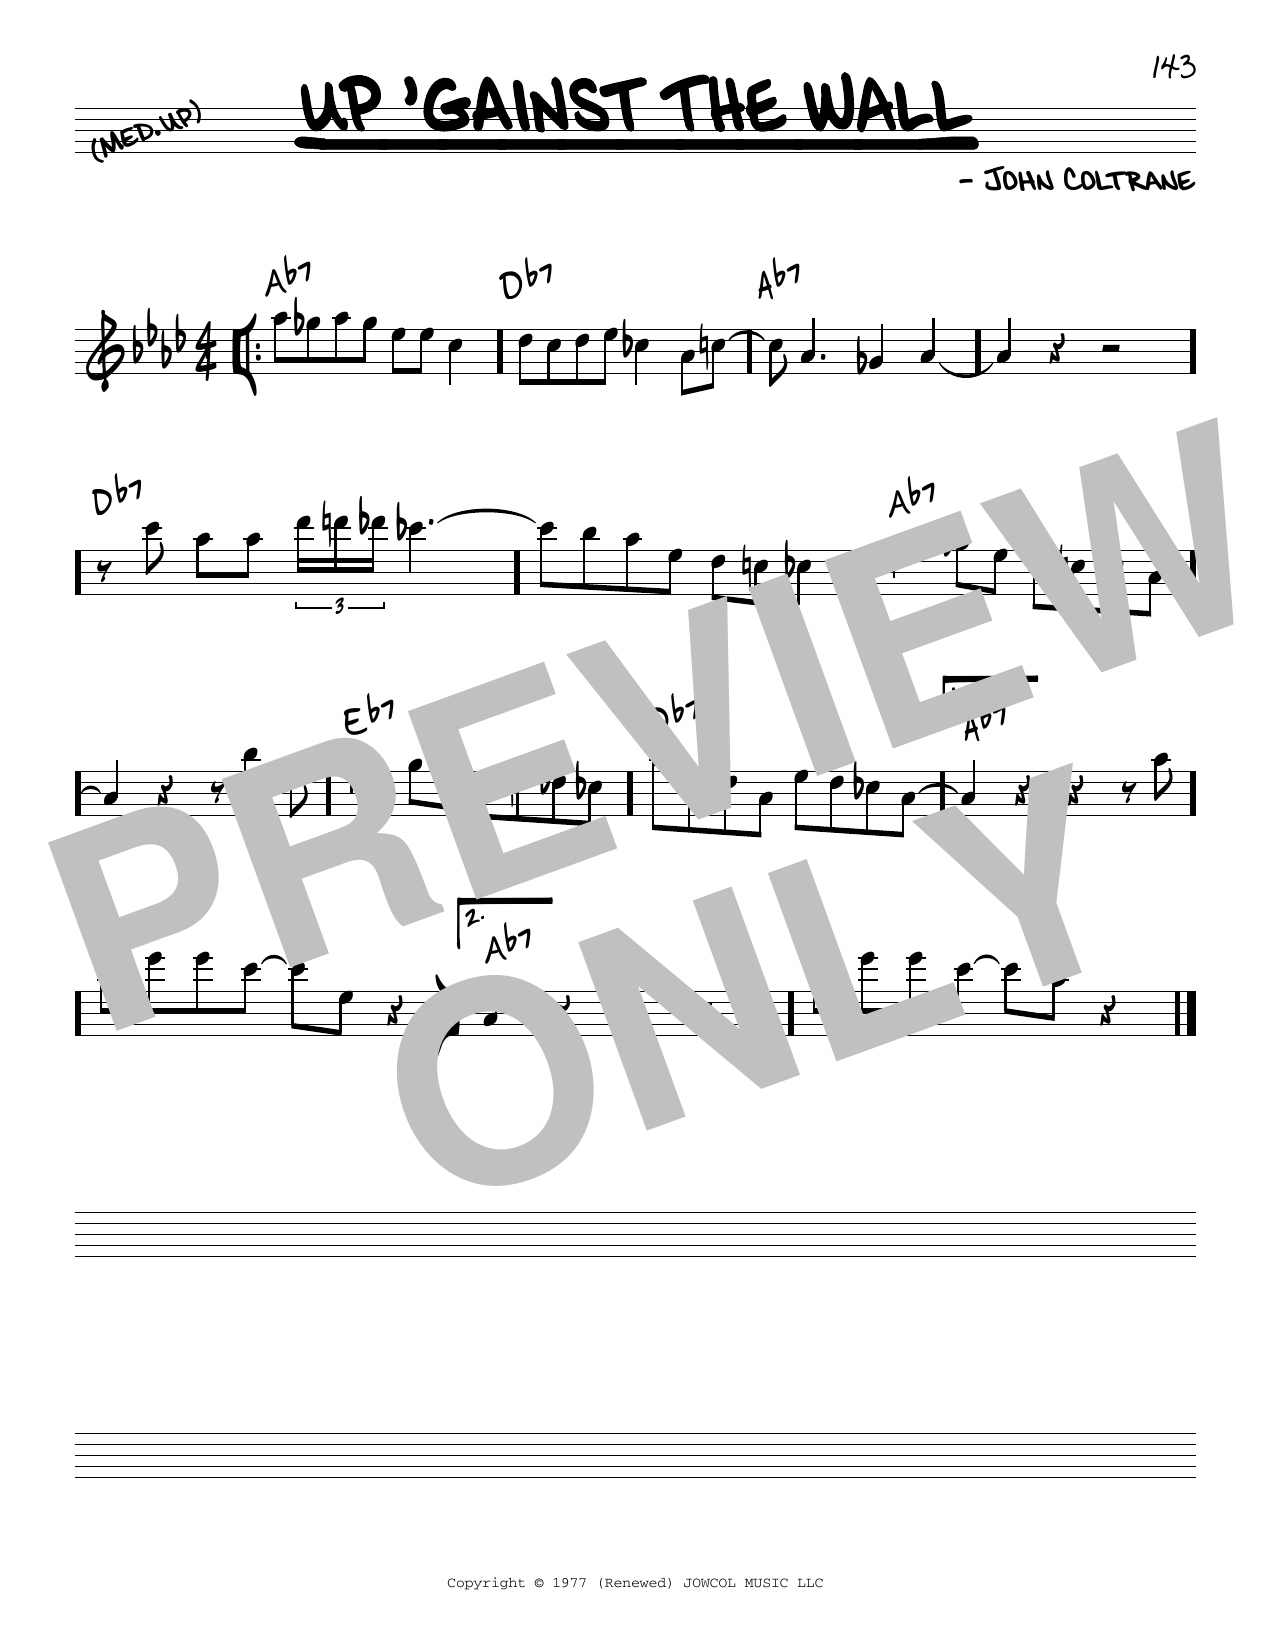 Download John Coltrane Up 'Gainst The Wall Sheet Music